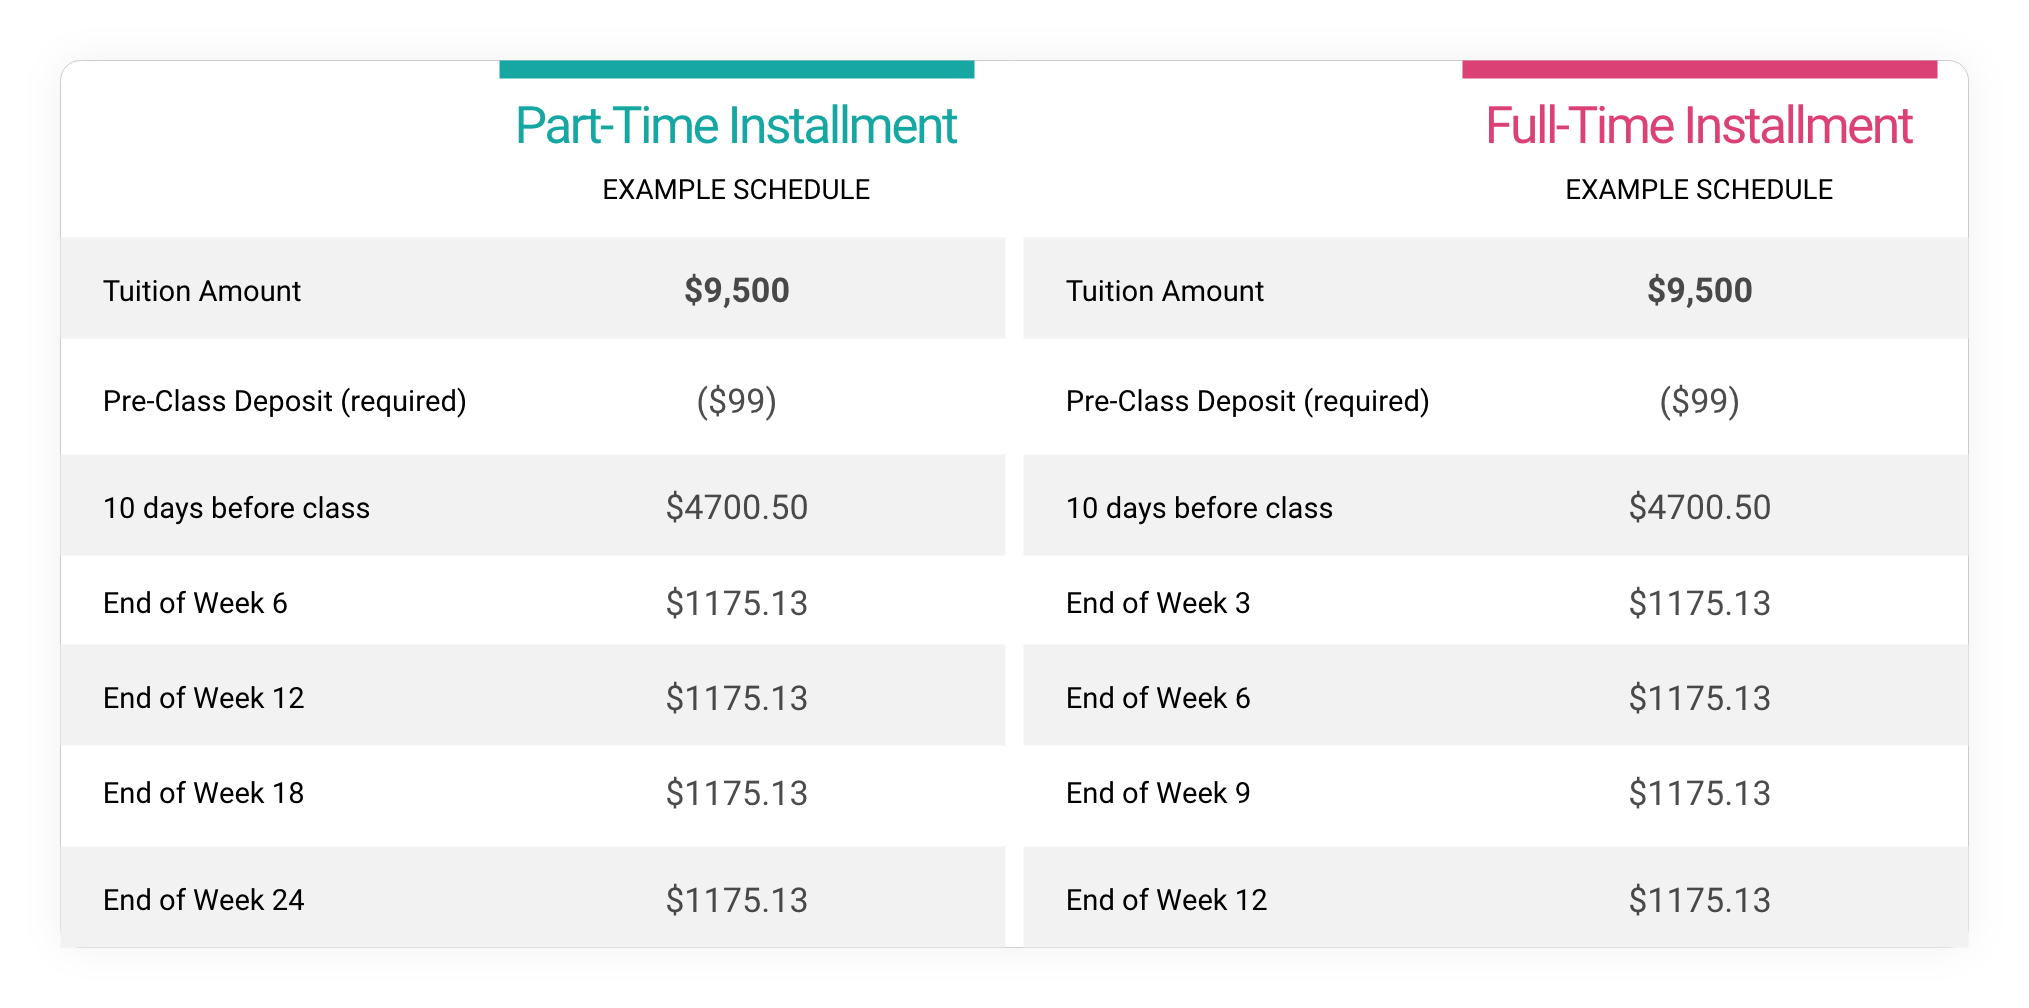 Payment Schedule Examples